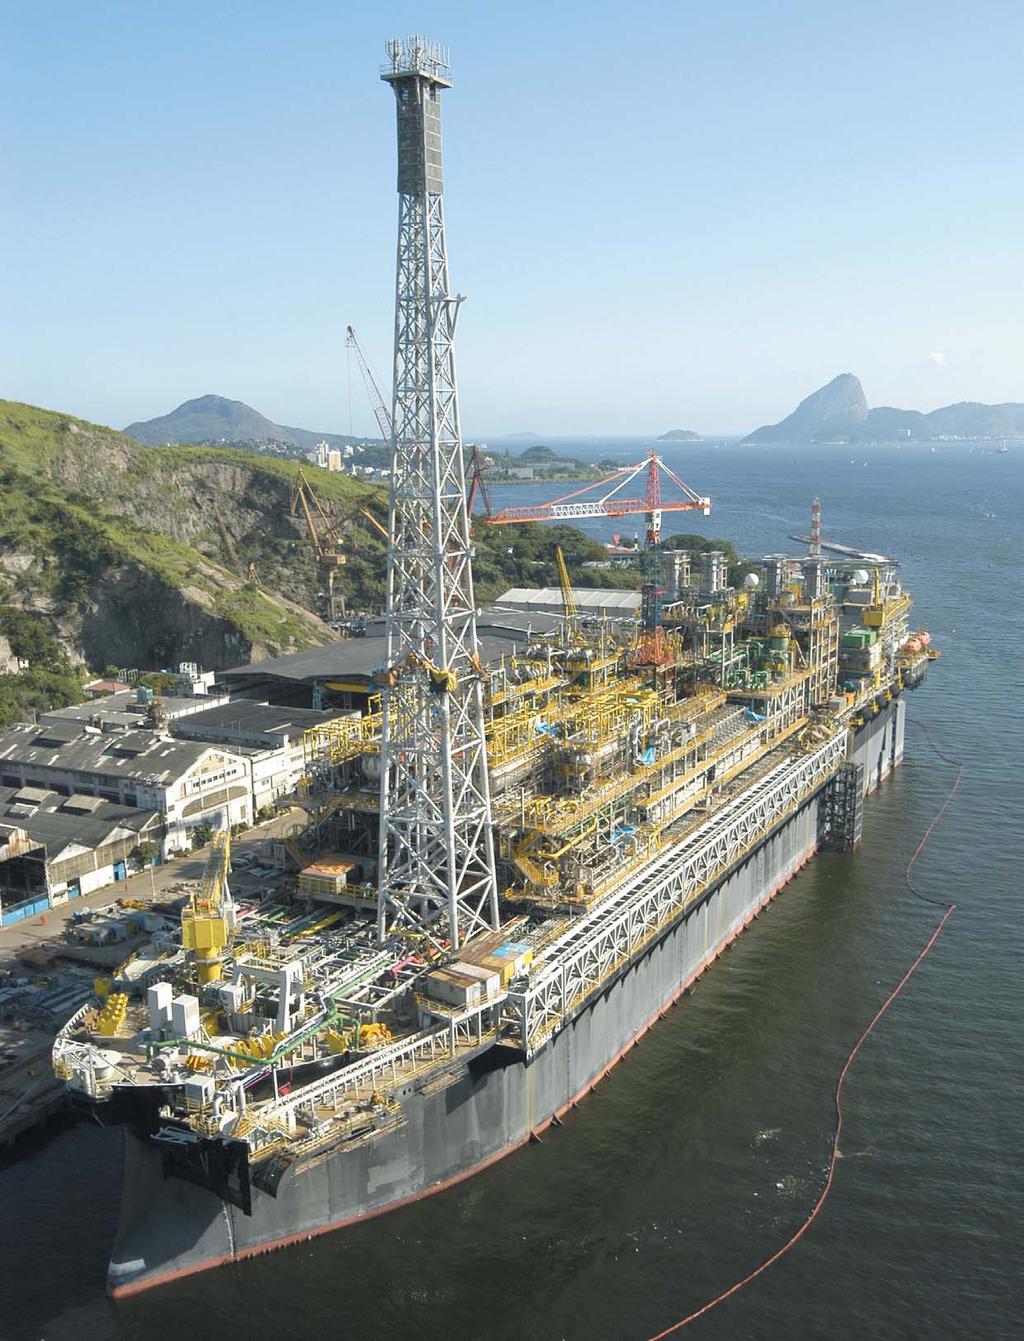 SembCorp Marine: Ship Conversion and Offshore Sector Our ship conversion and offshore sector accounted for 37 per cent of our total revenue in 2003. We delivered several key projects this year.